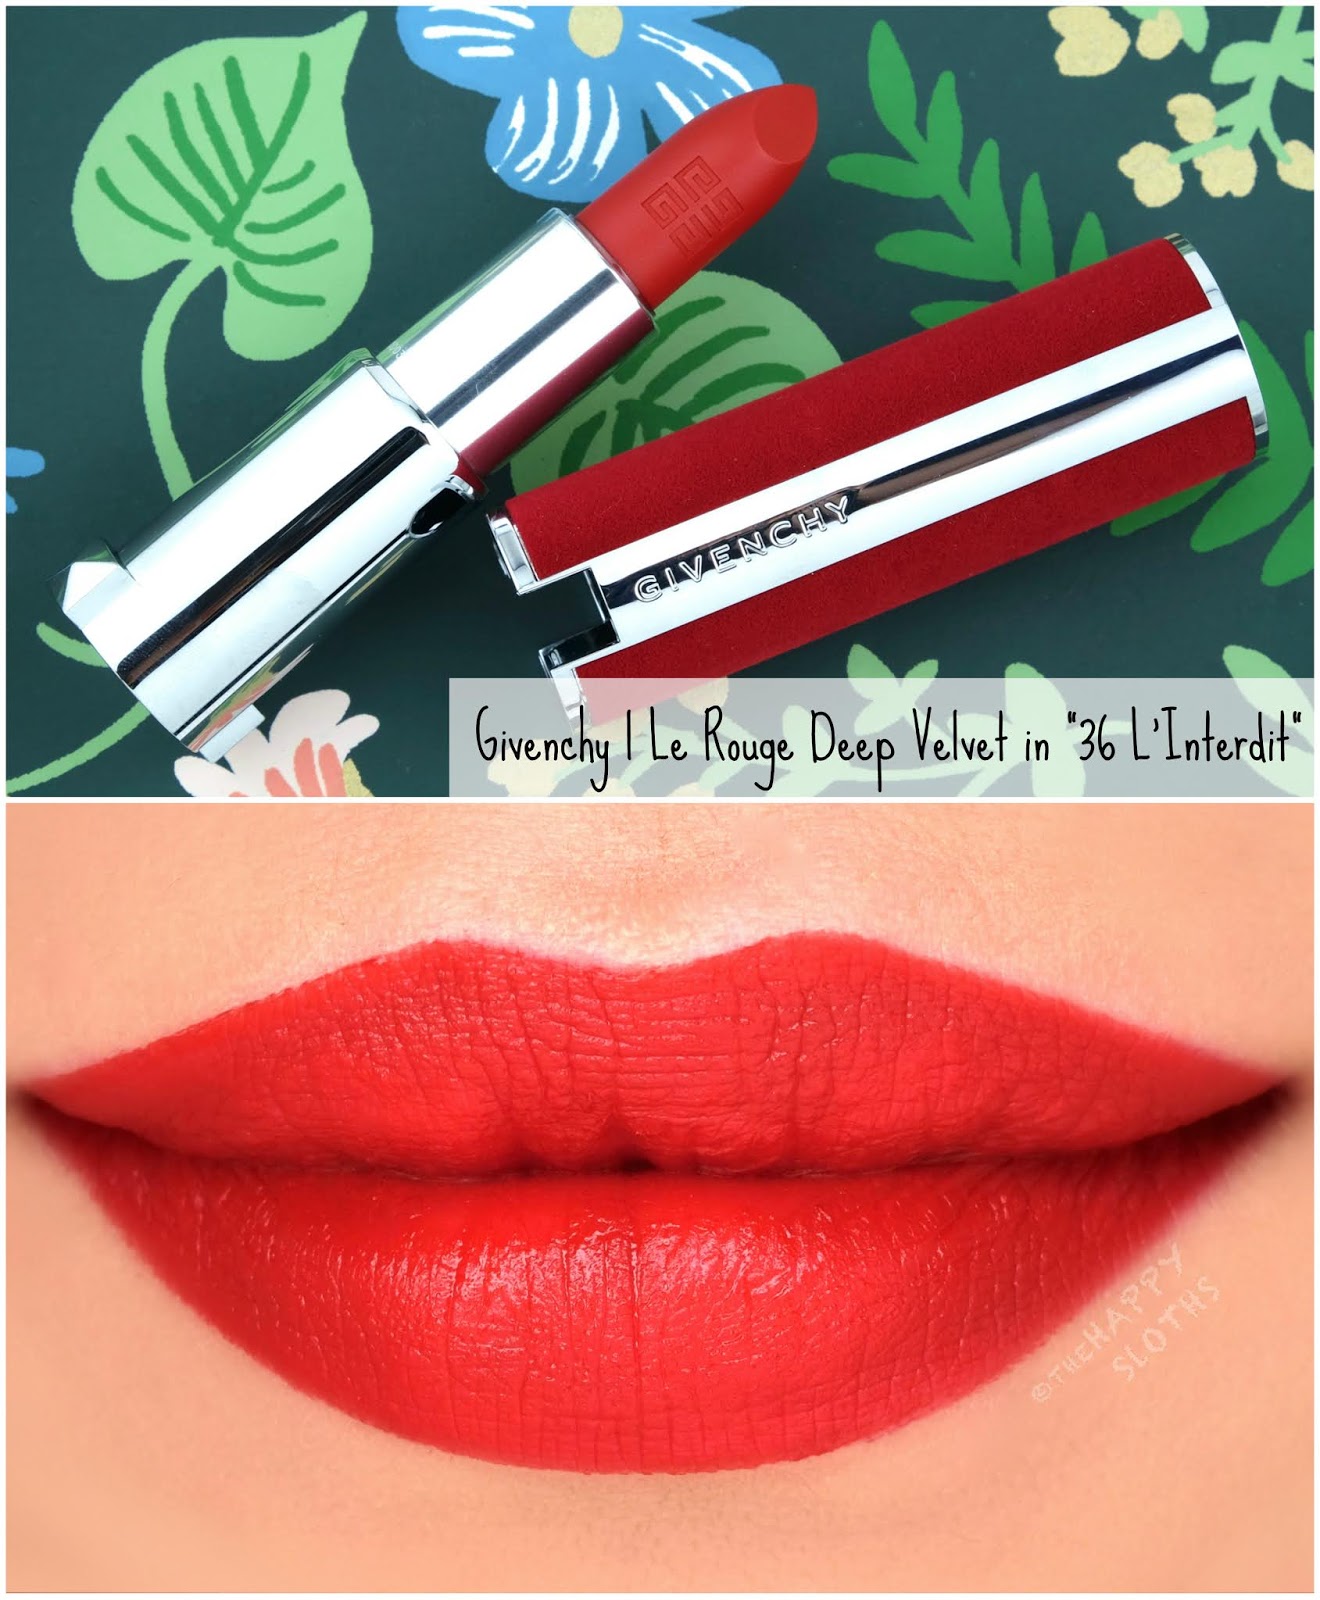 Givenchy | Le Rouge Deep Velvet Matte Lipstick in "6 L'Interdit": Review and Swatches